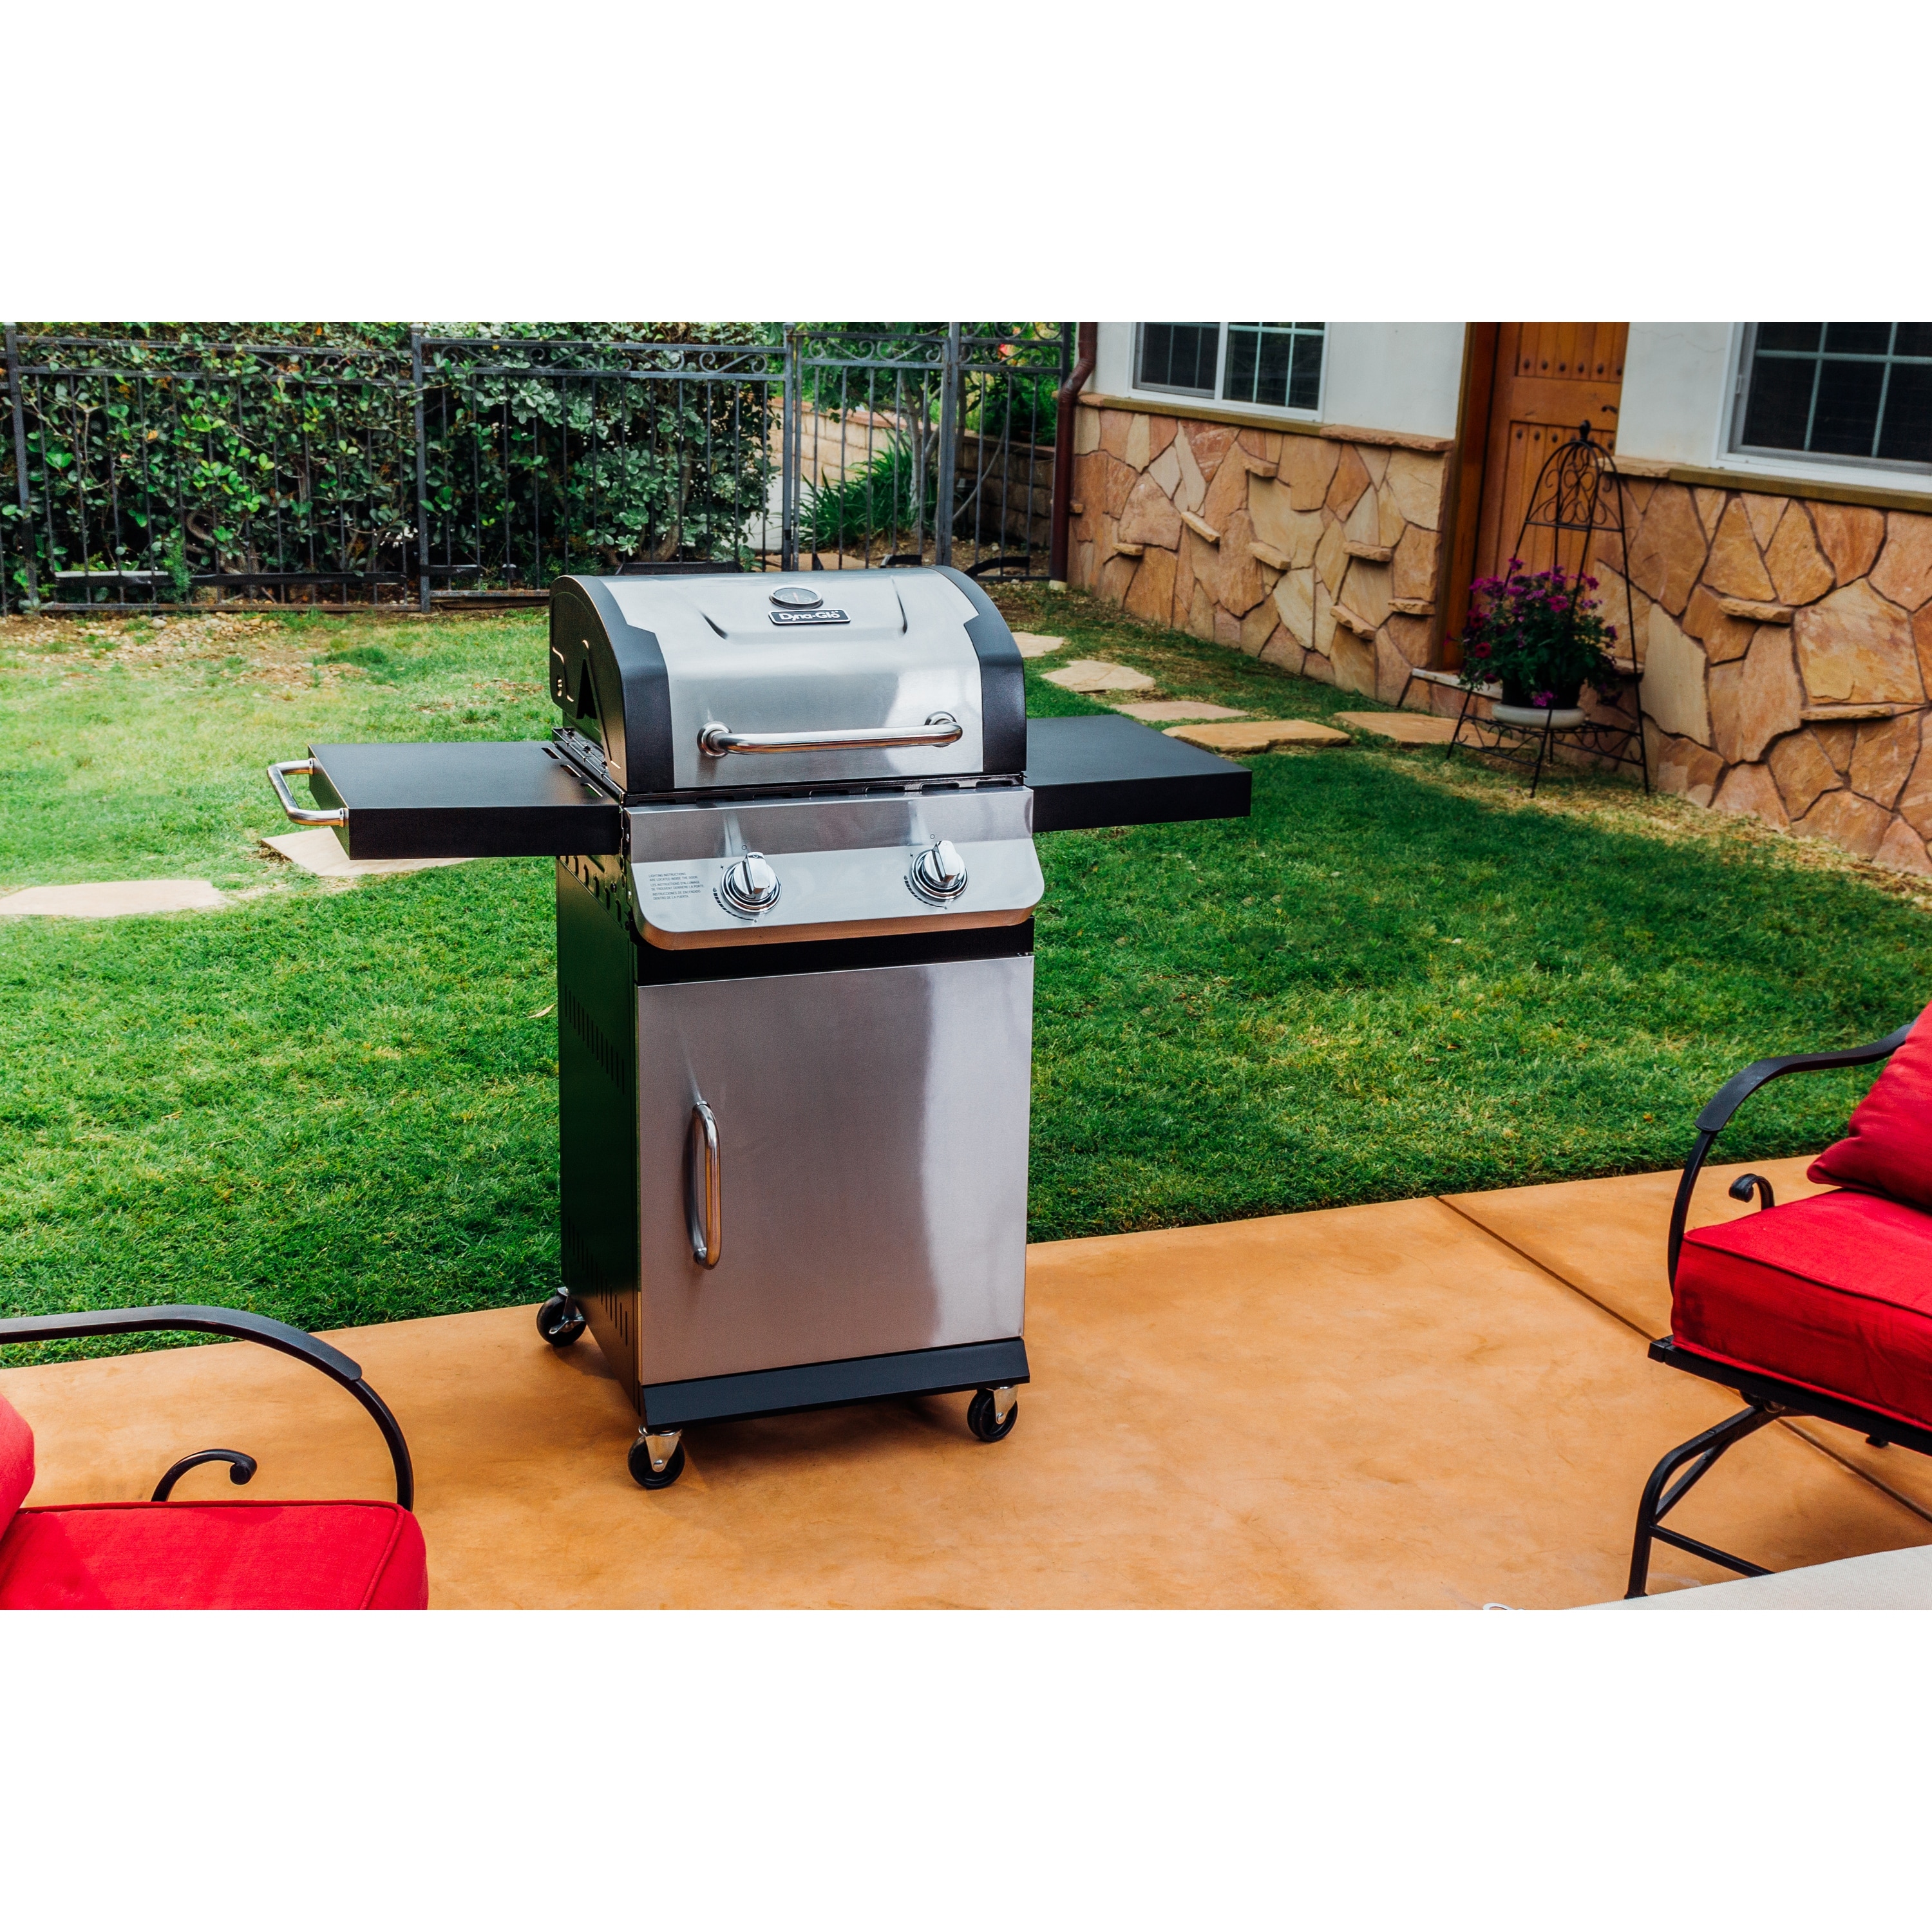 Dyna-glo Premier 2 Burner Stainless Steel Propane Gas Grill - N/a